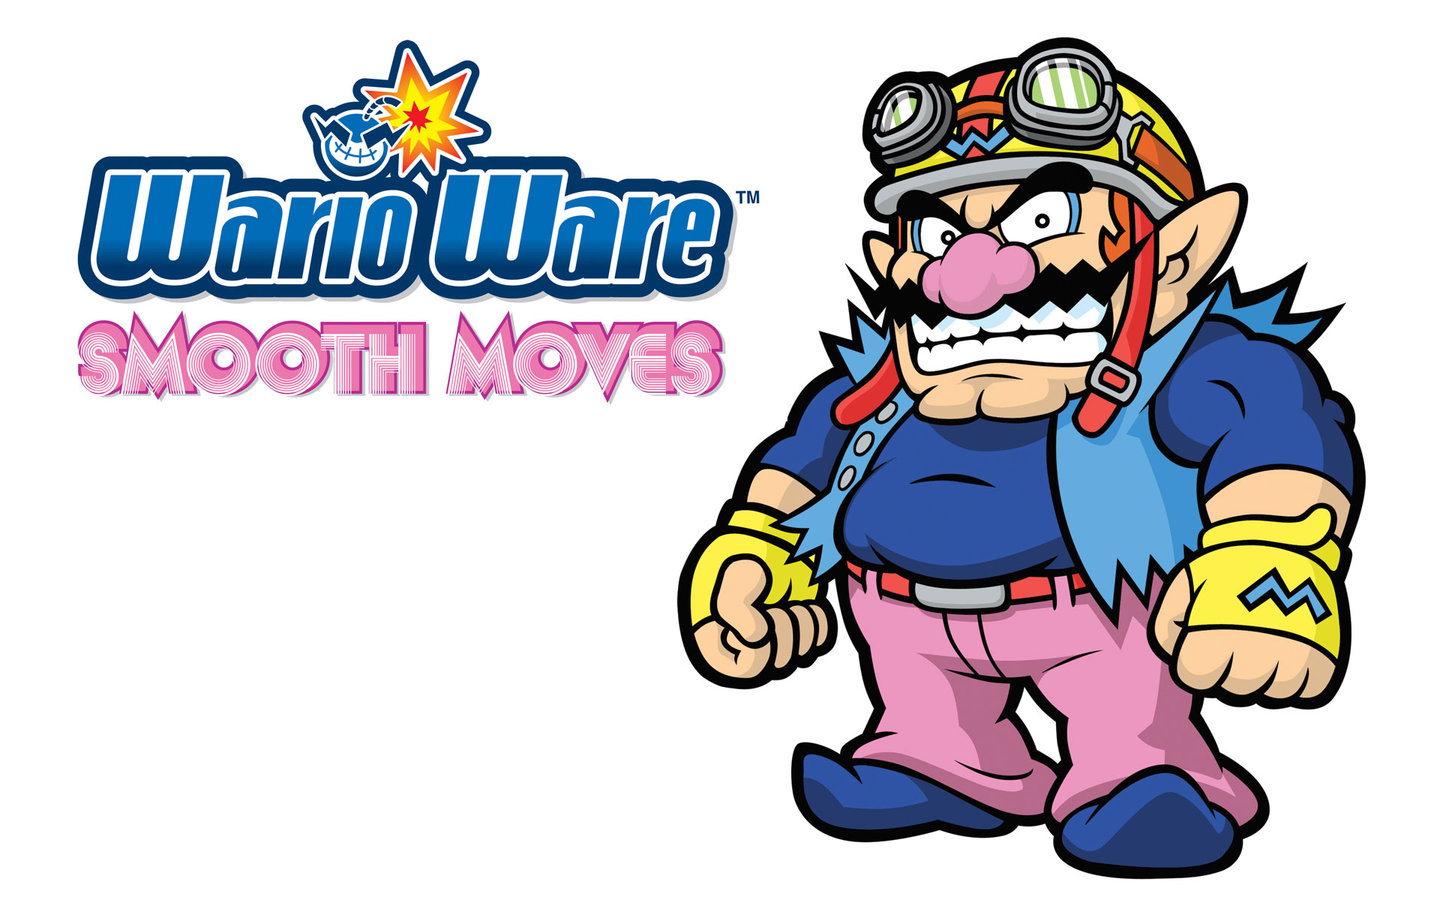 smooth moves warioware answer it